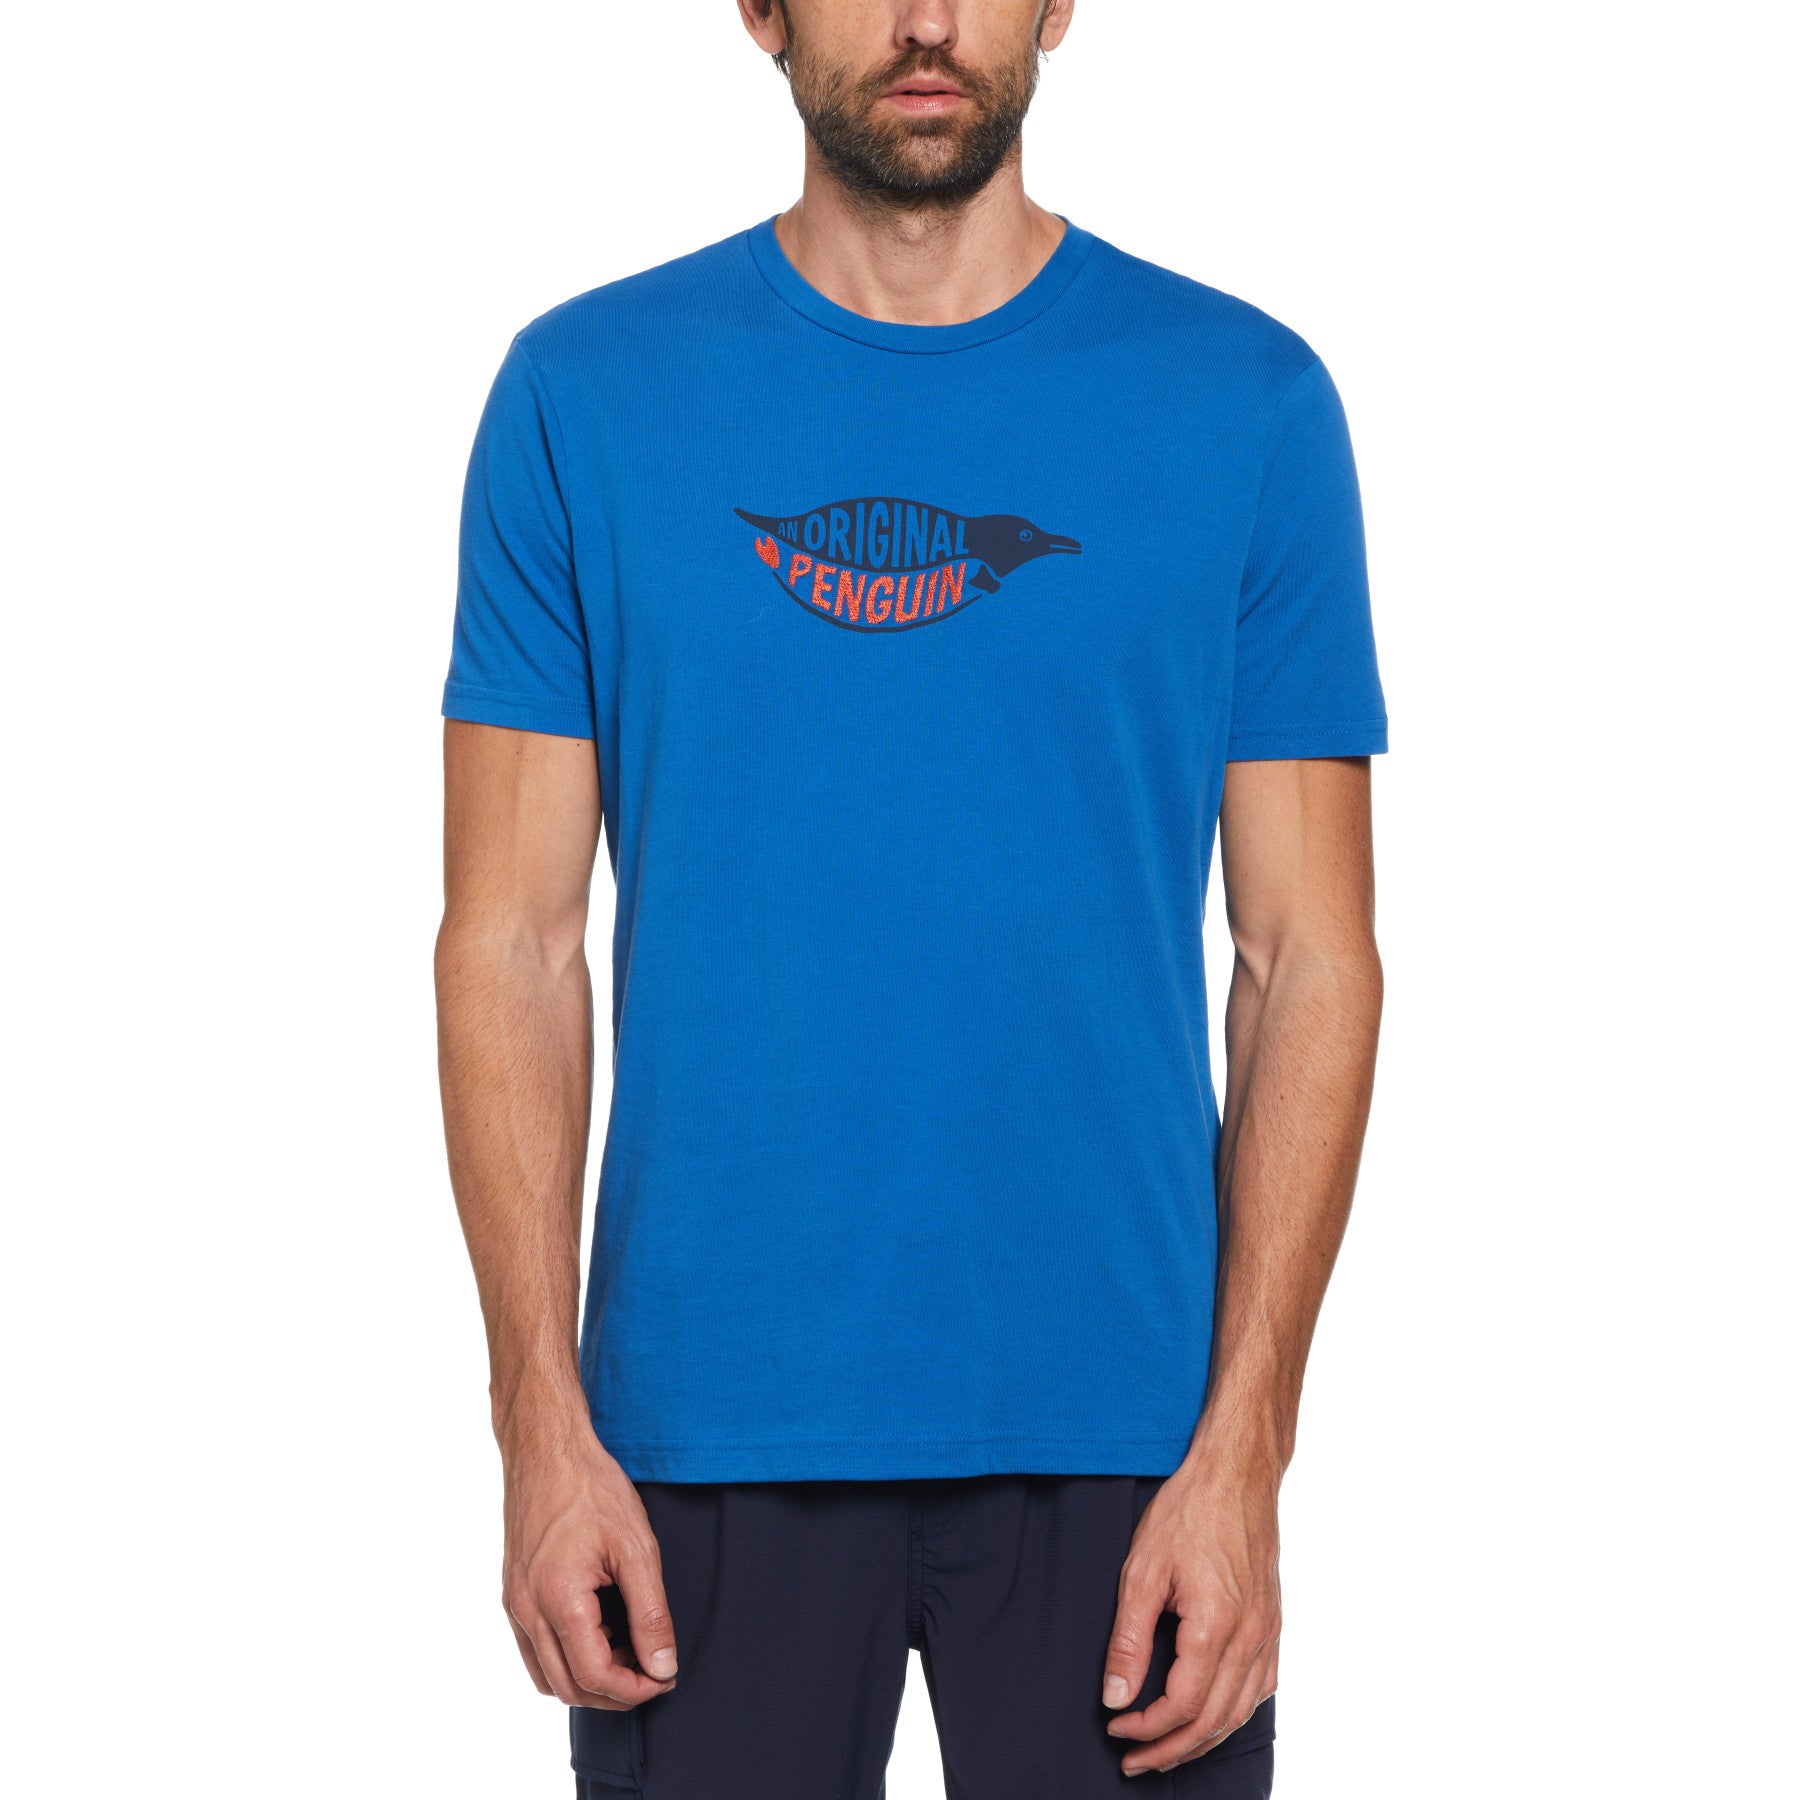 View Embroidered Penguin Graphic TShirt In Classic Blue information